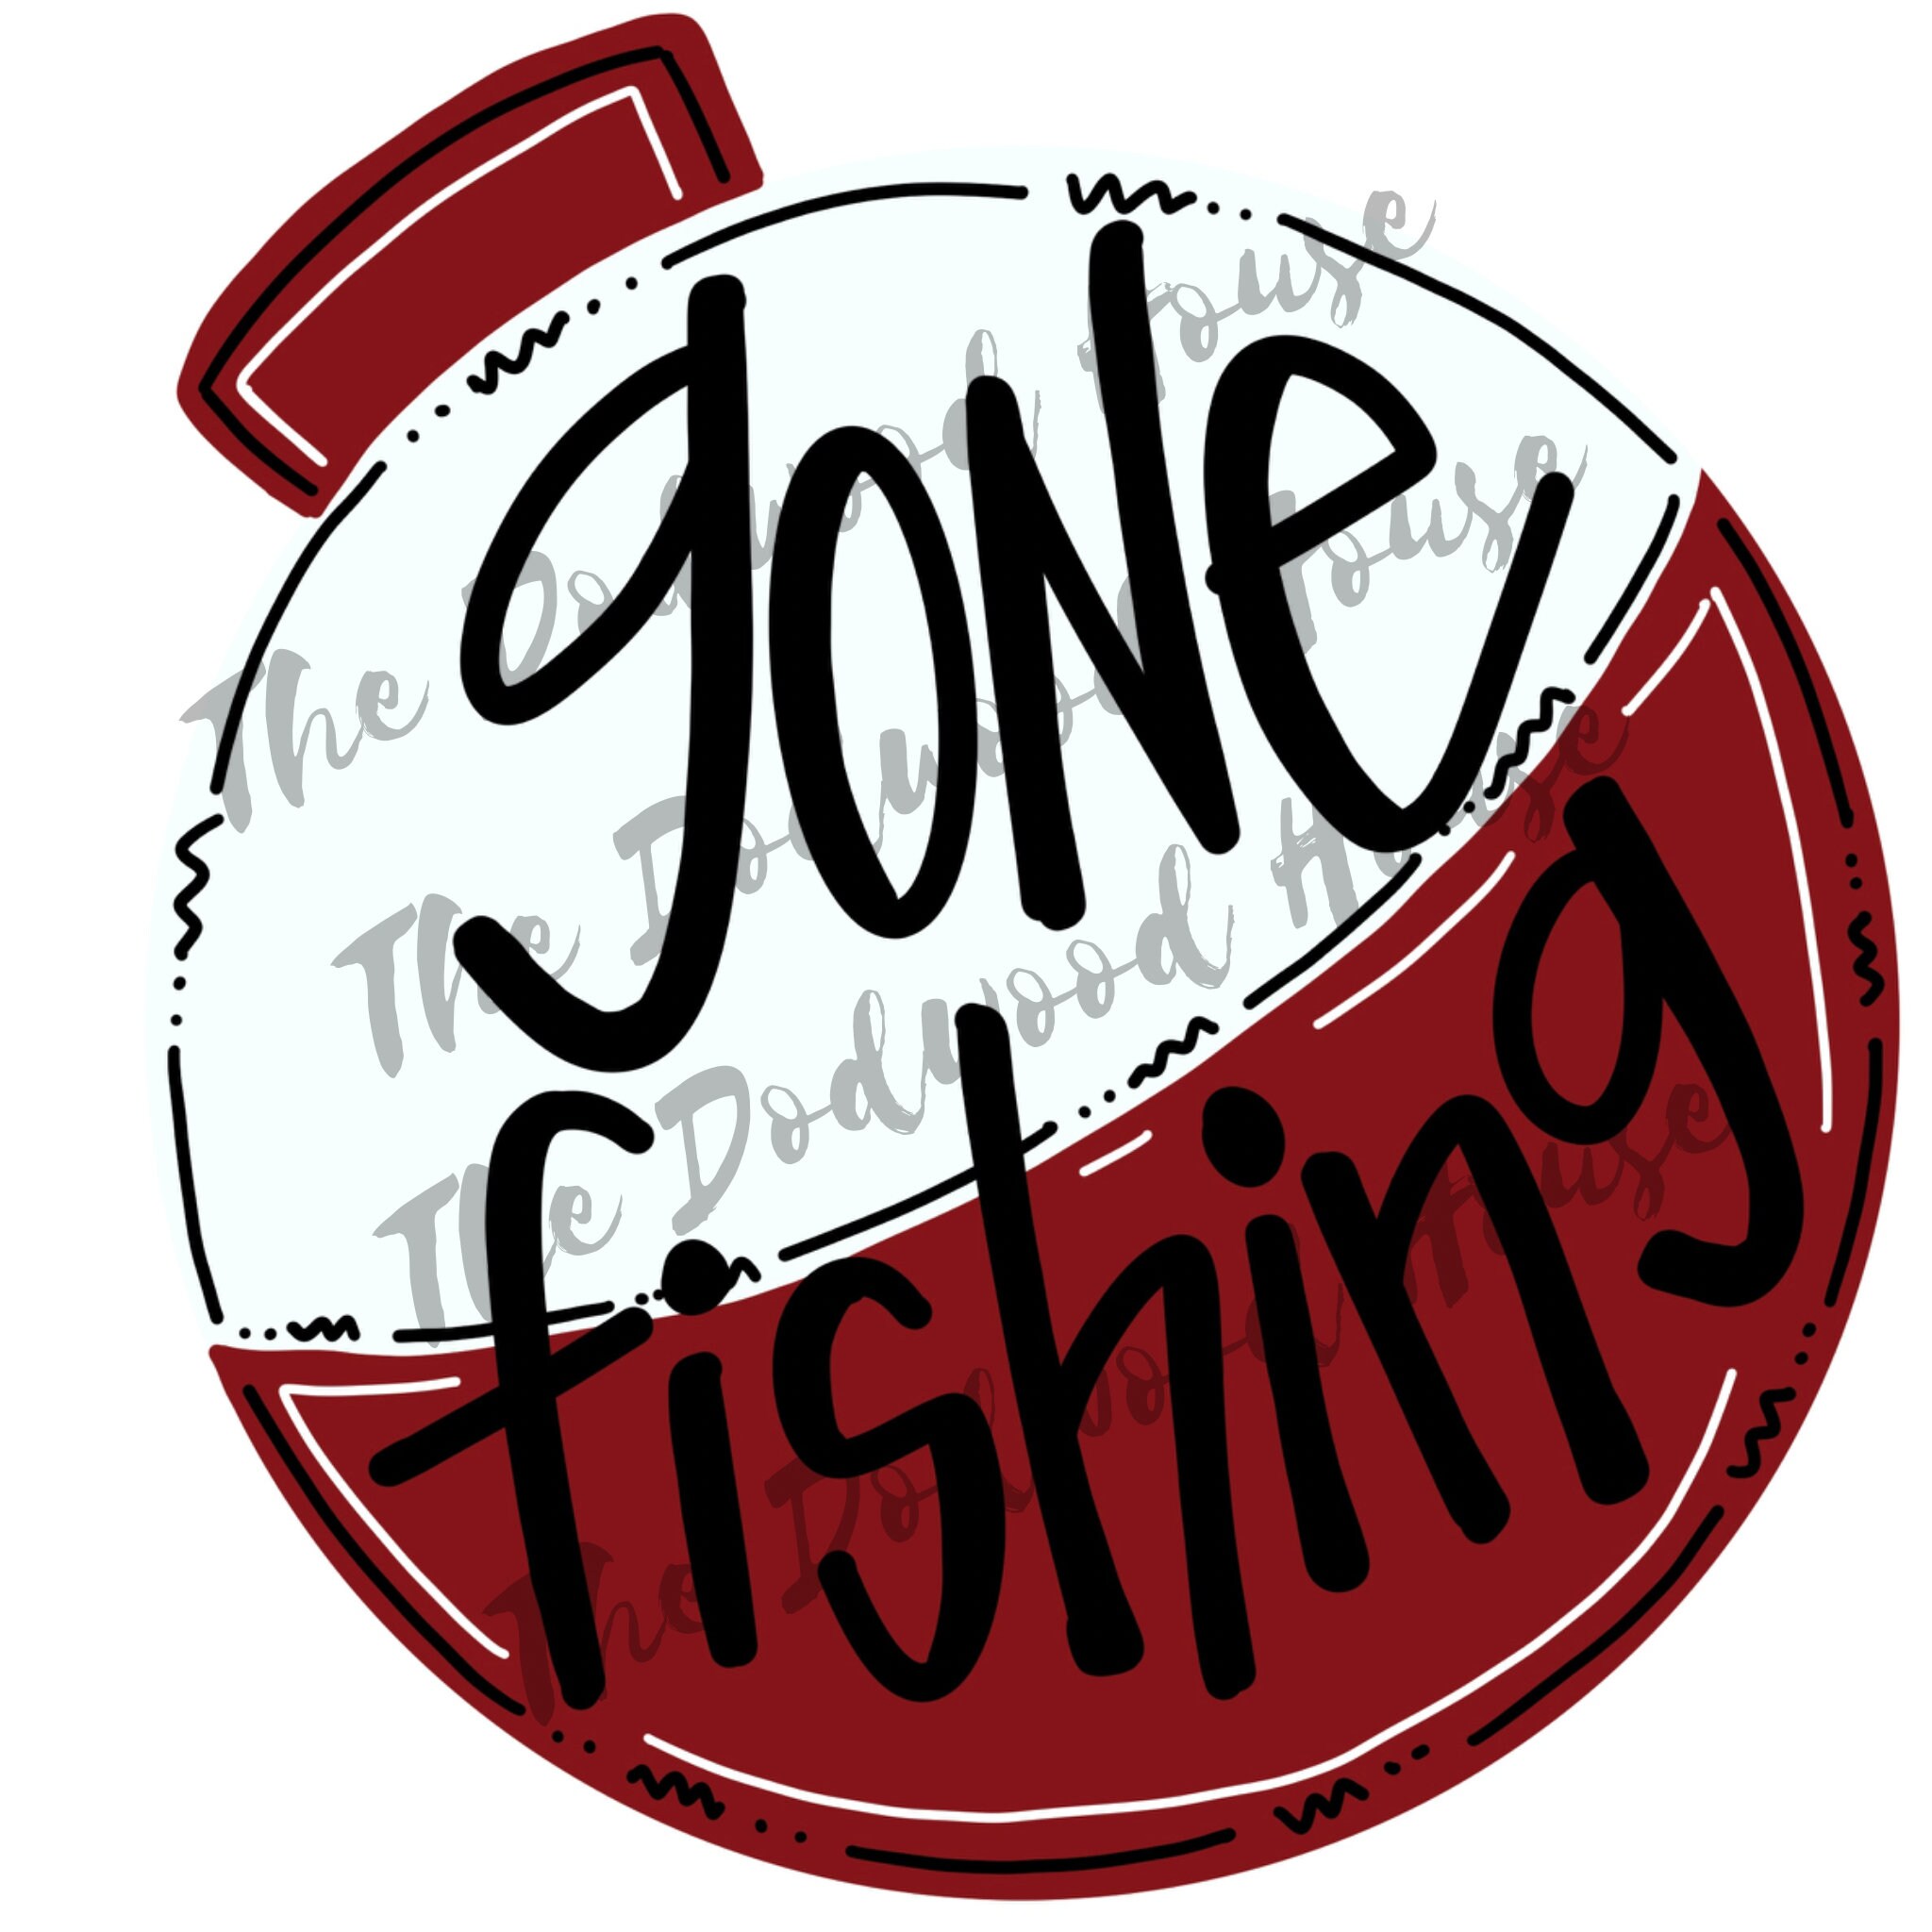 Fishing Pole Instant Digital Download Svg, Png, Dxf, and Eps Files Included  Bobber, Fishing Rod 